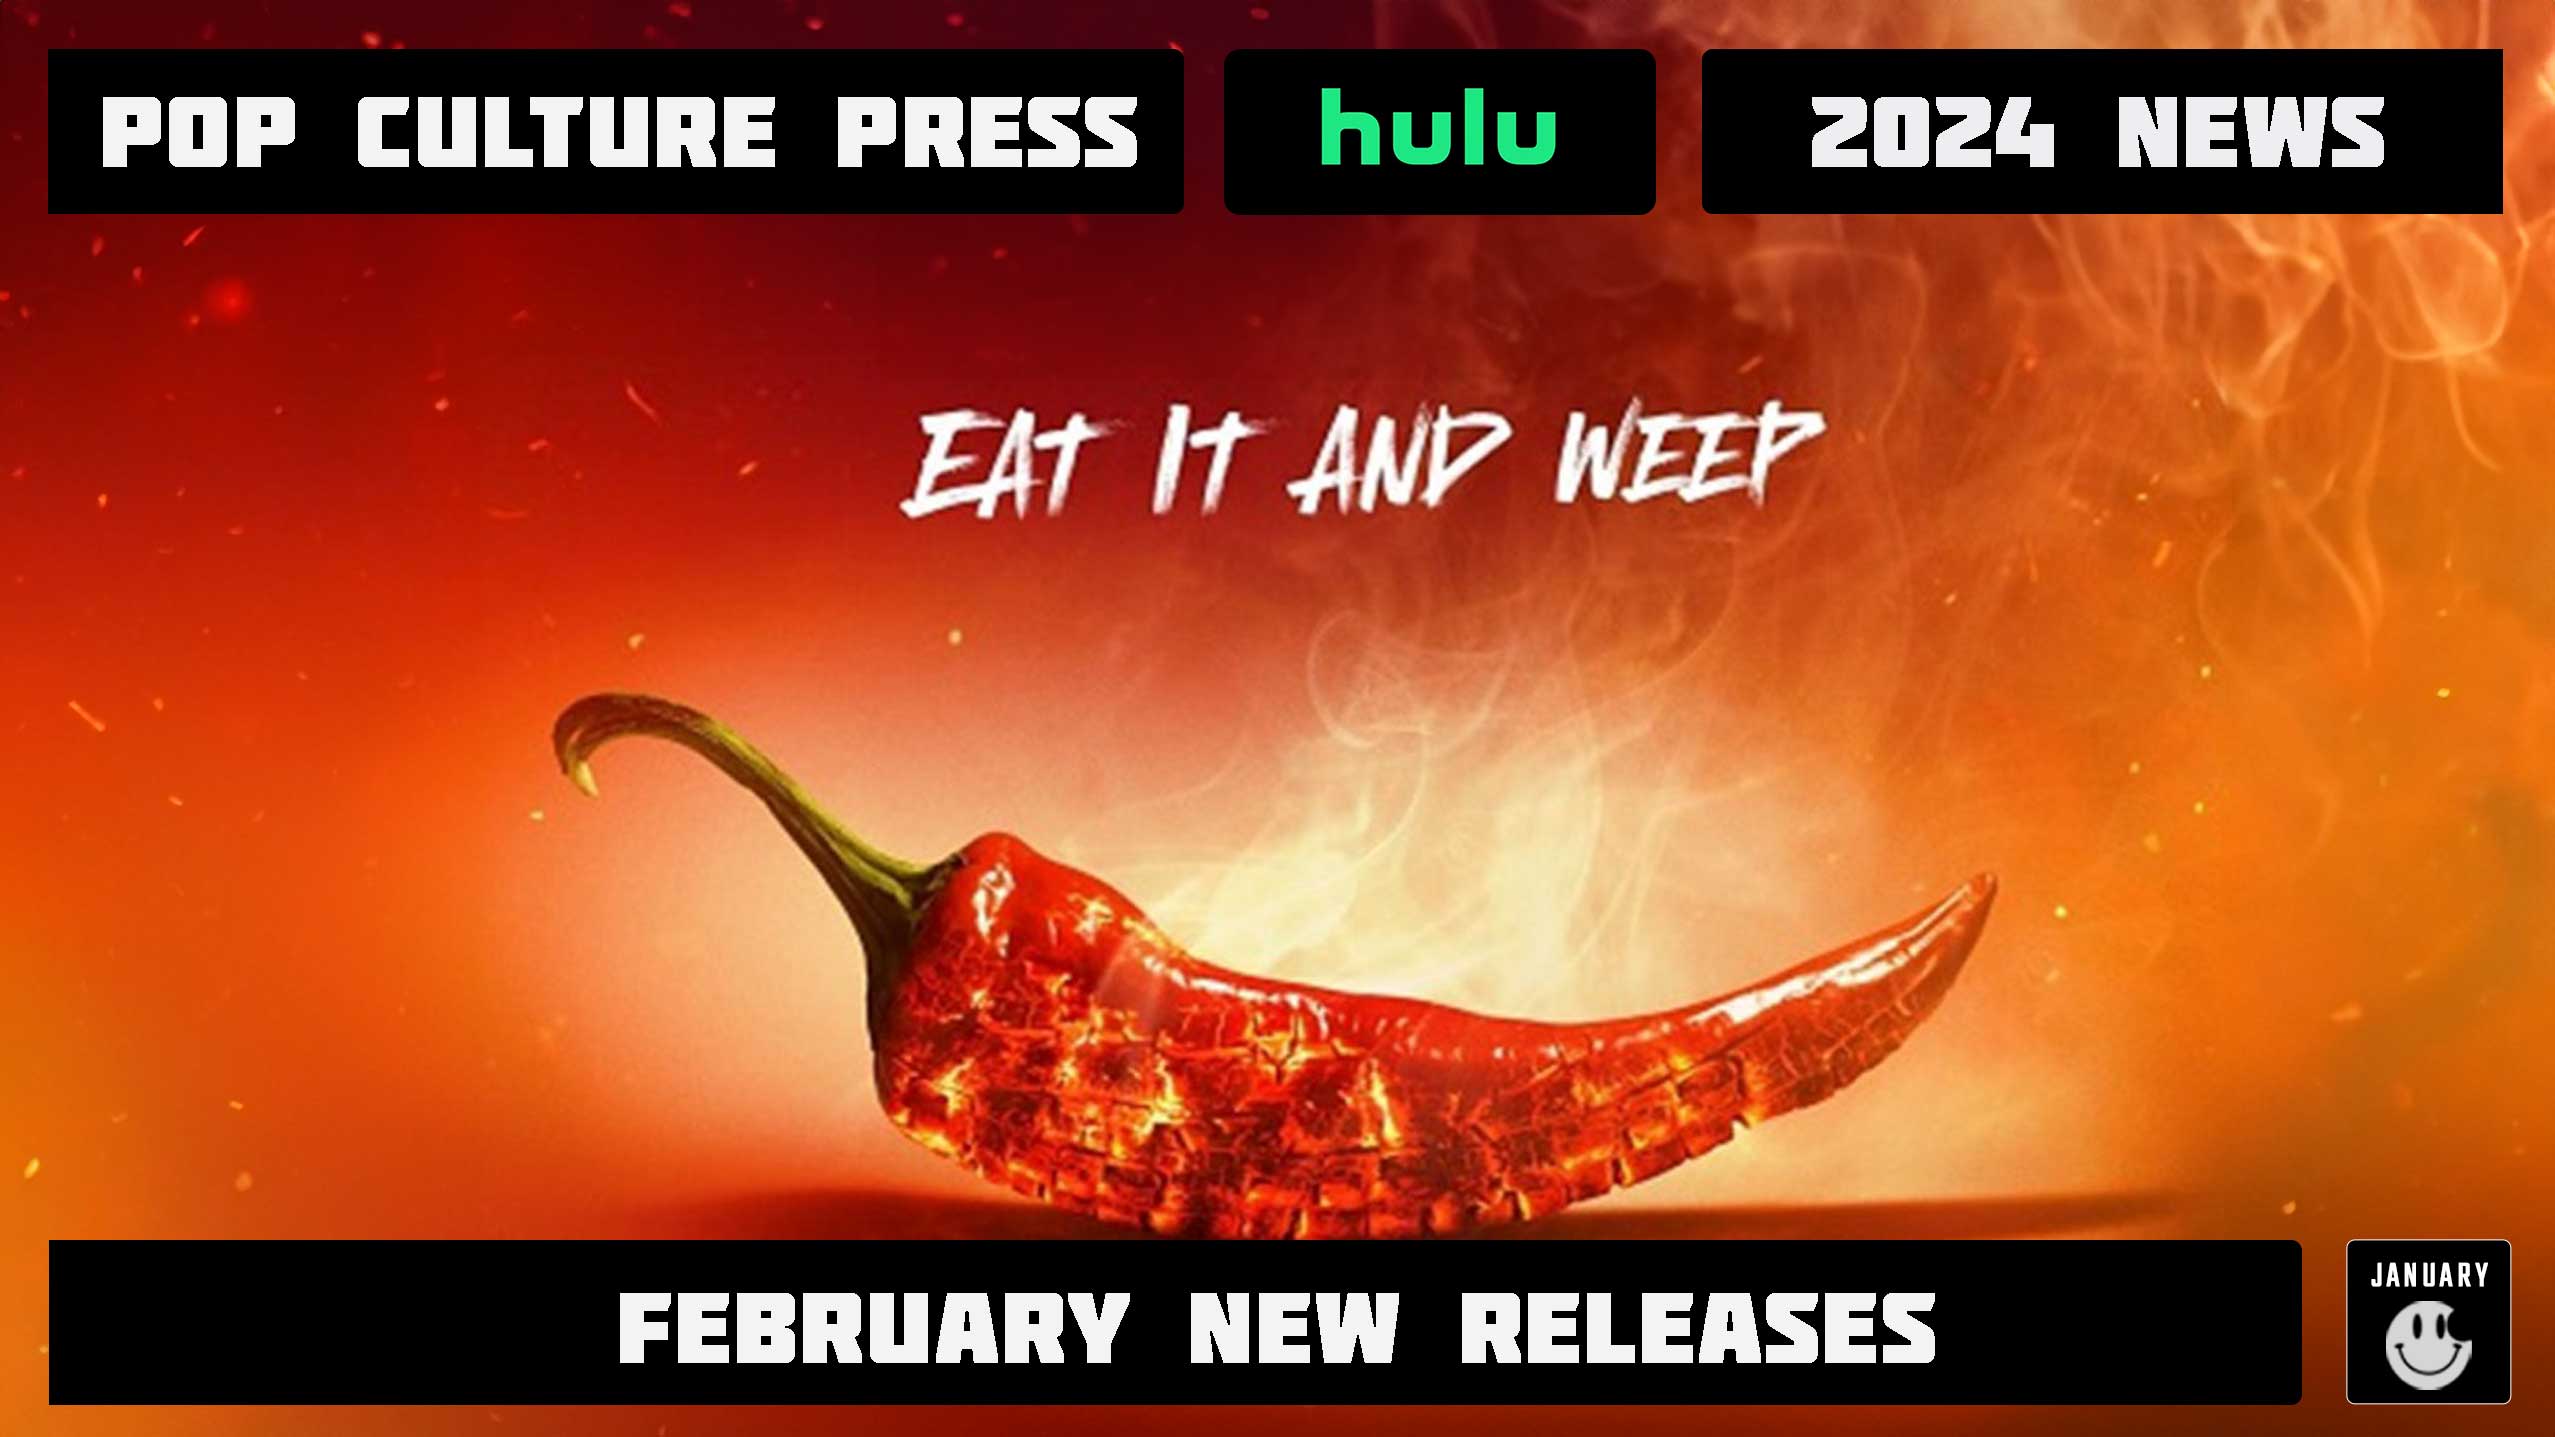 Hulu Streaming News and February 2024 New Releases